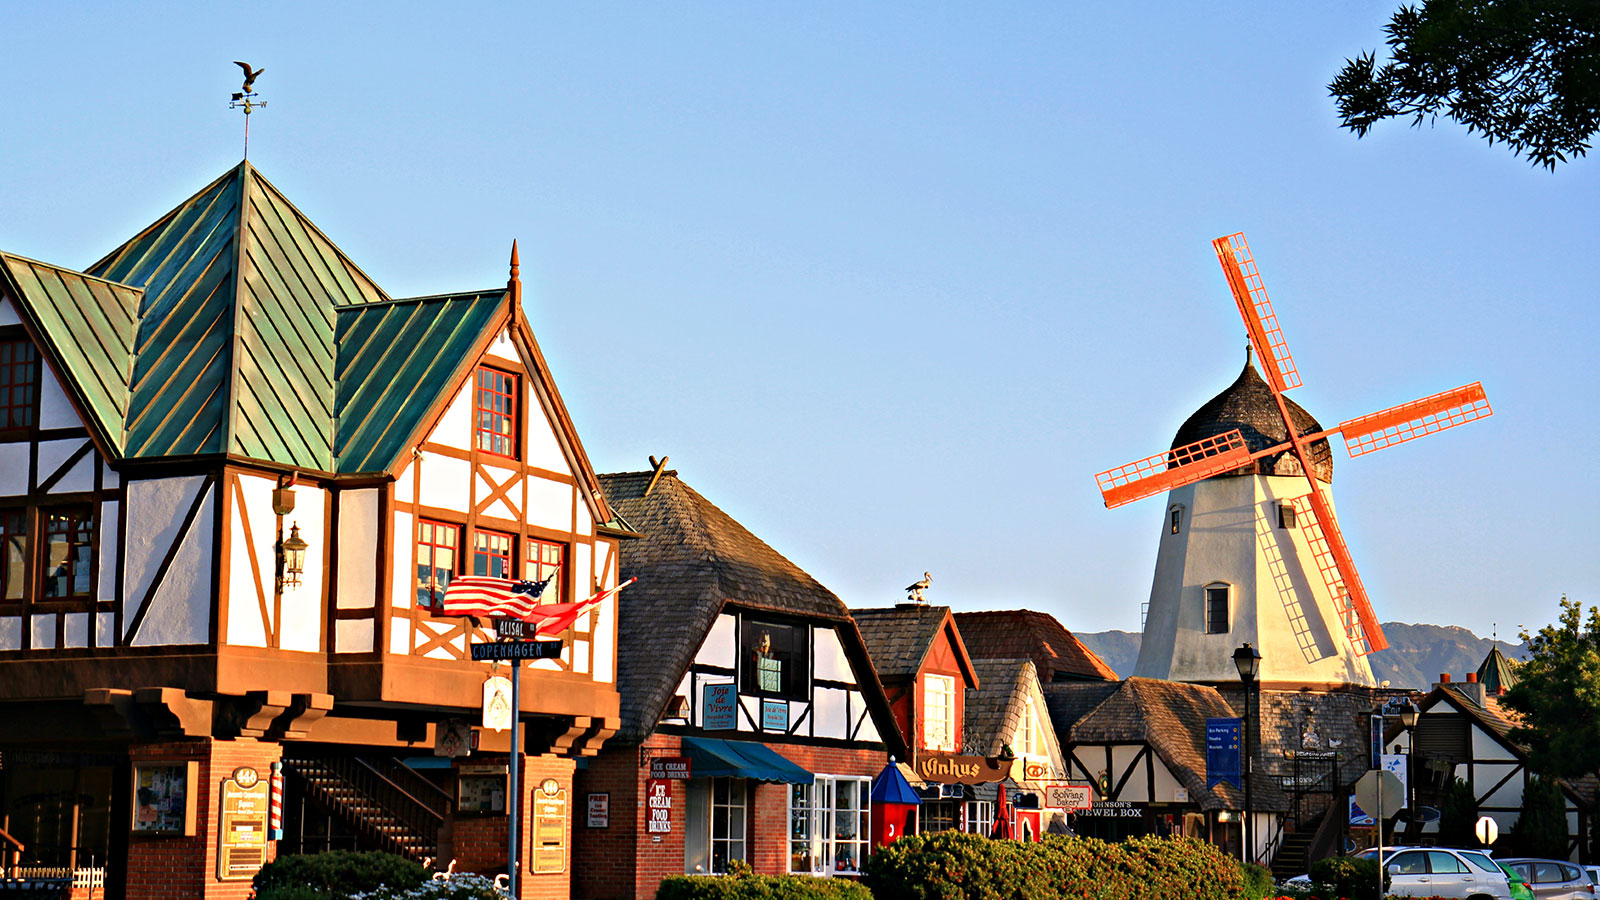 Explore the historic core of downtown Solvang, founded in 1911 by Danish immigrants.